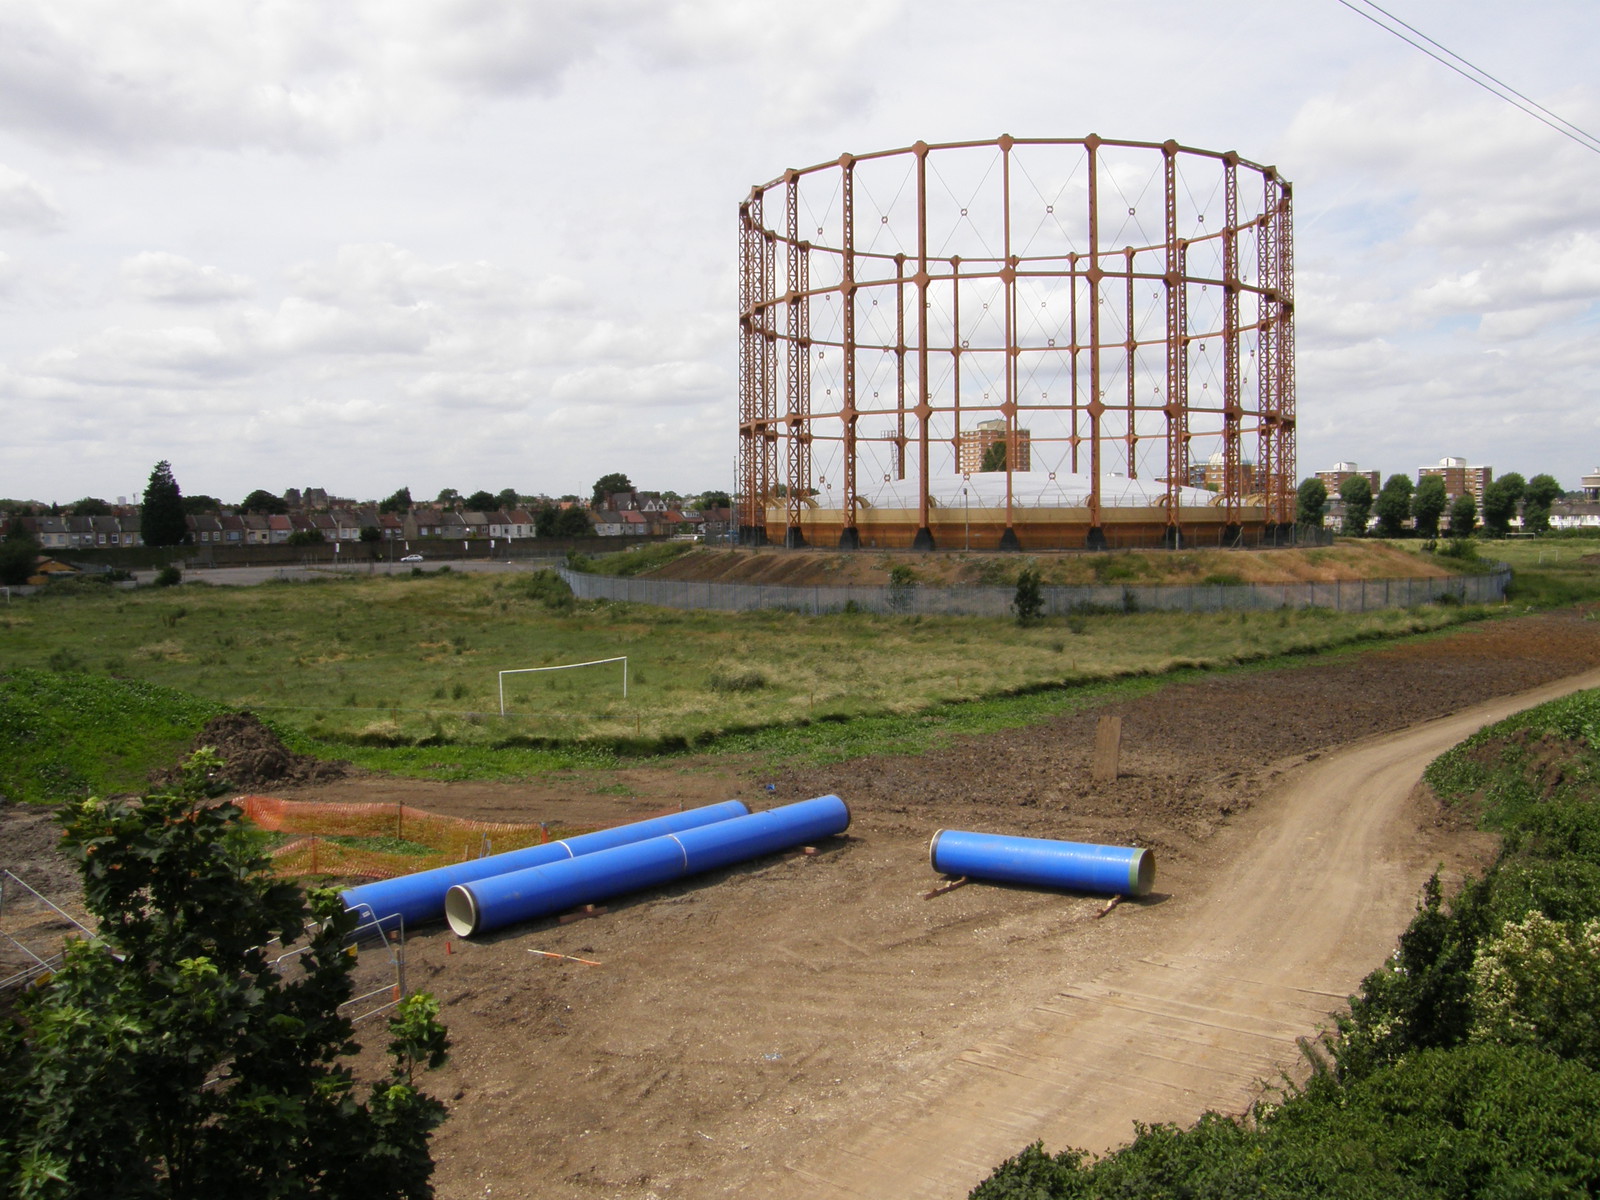 A gas tower next to the North Circular Road